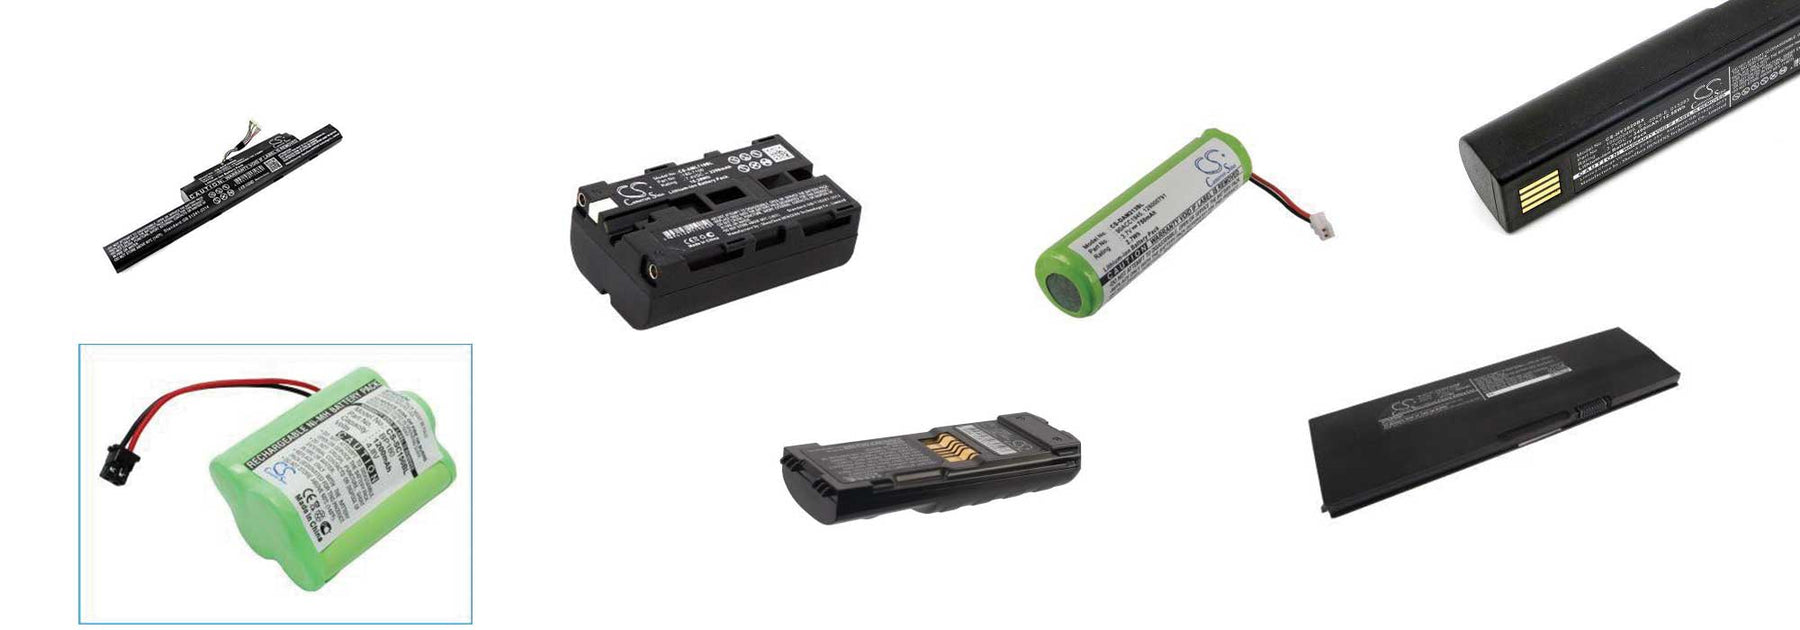 Lithium Ion Replacement Battery Benefits and Maintenance Tips